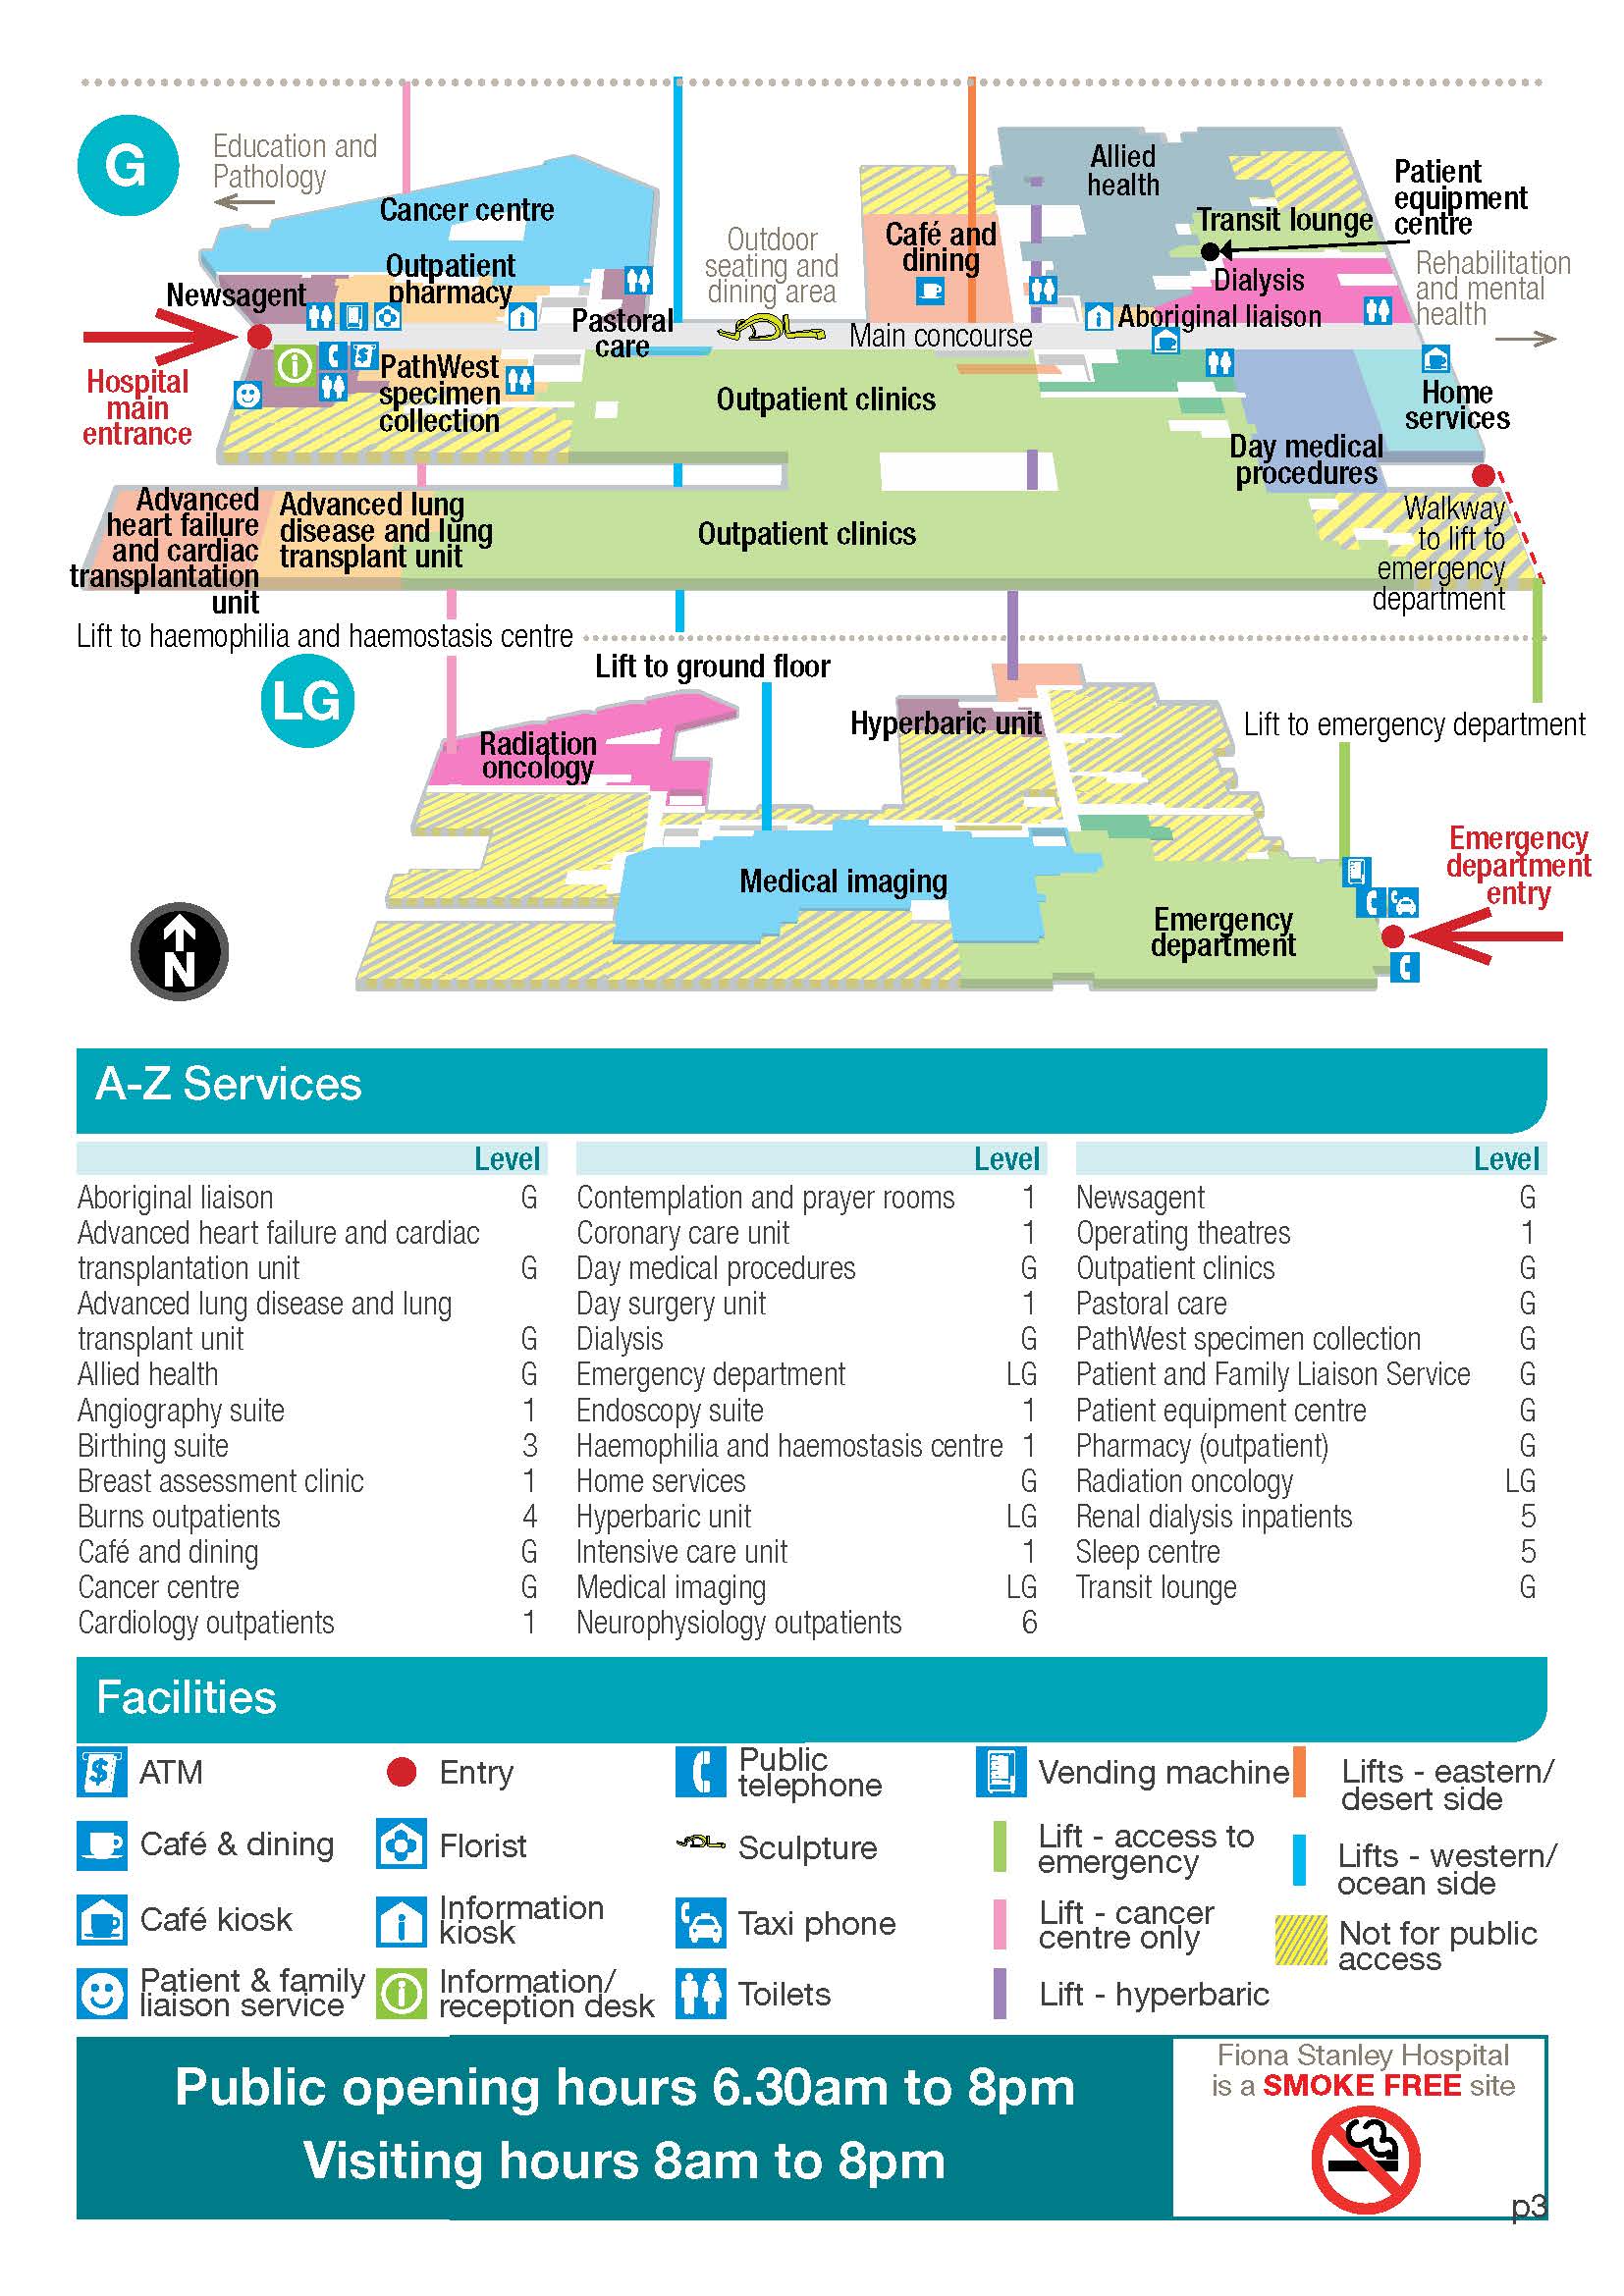 Map showing the services at Fiona Stanley Hospital by an A-Z listing